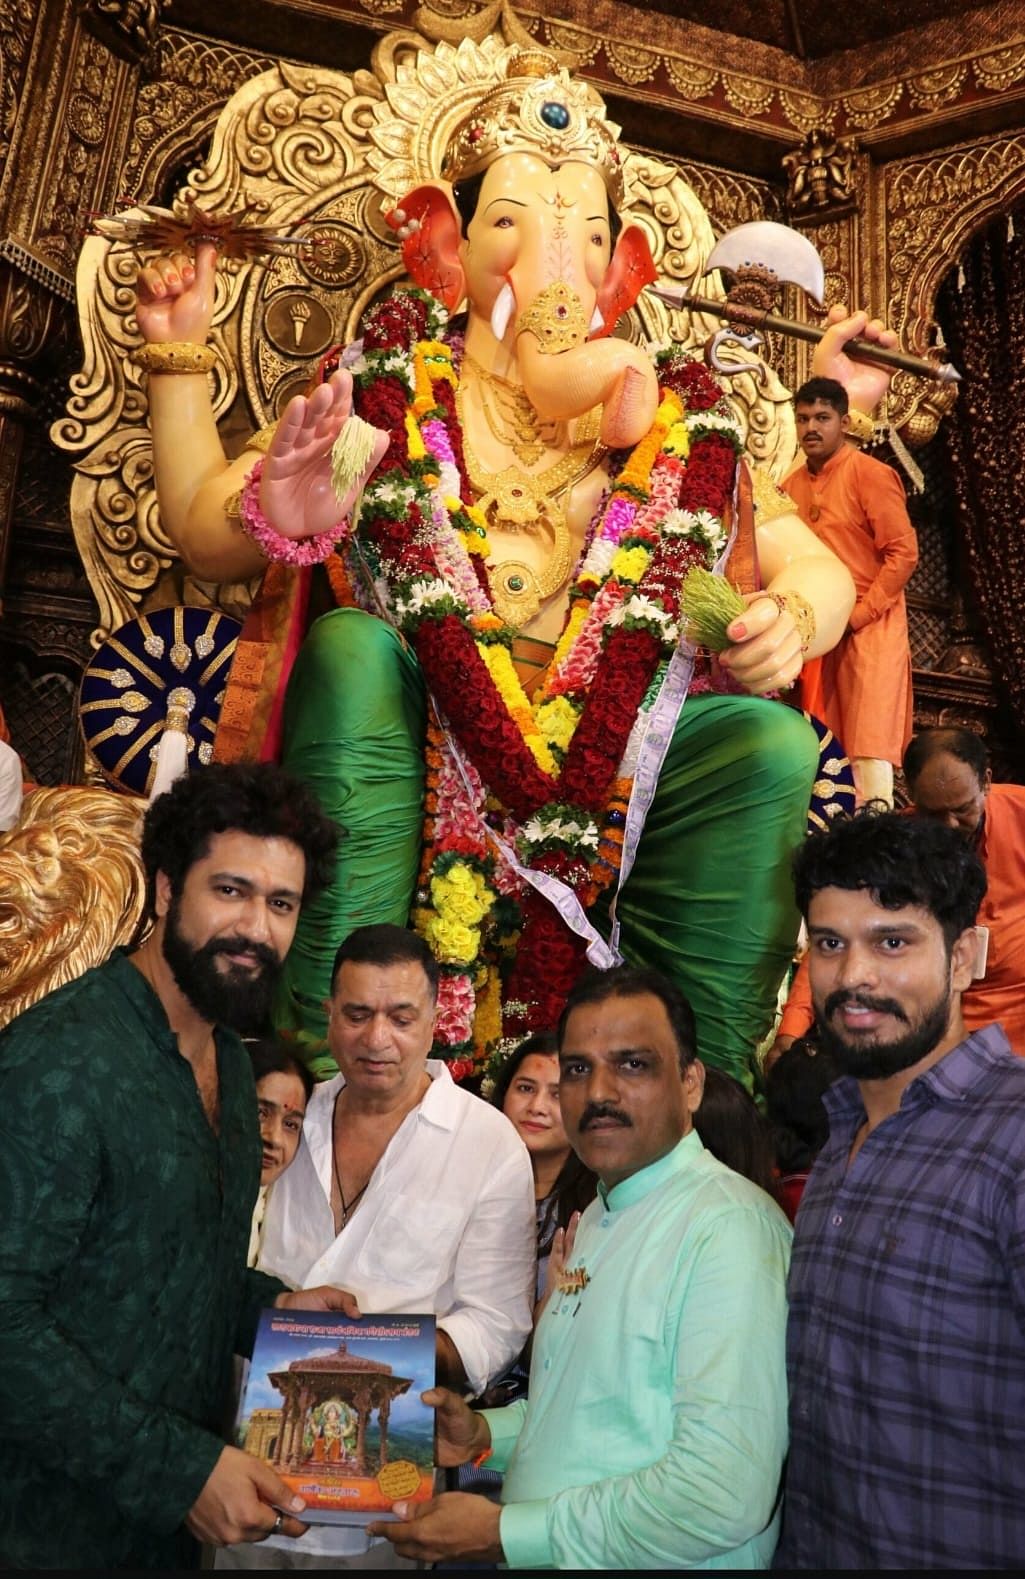 Vicky Kaushal after the darshan at Lalbaugcha Raja | special arrangement